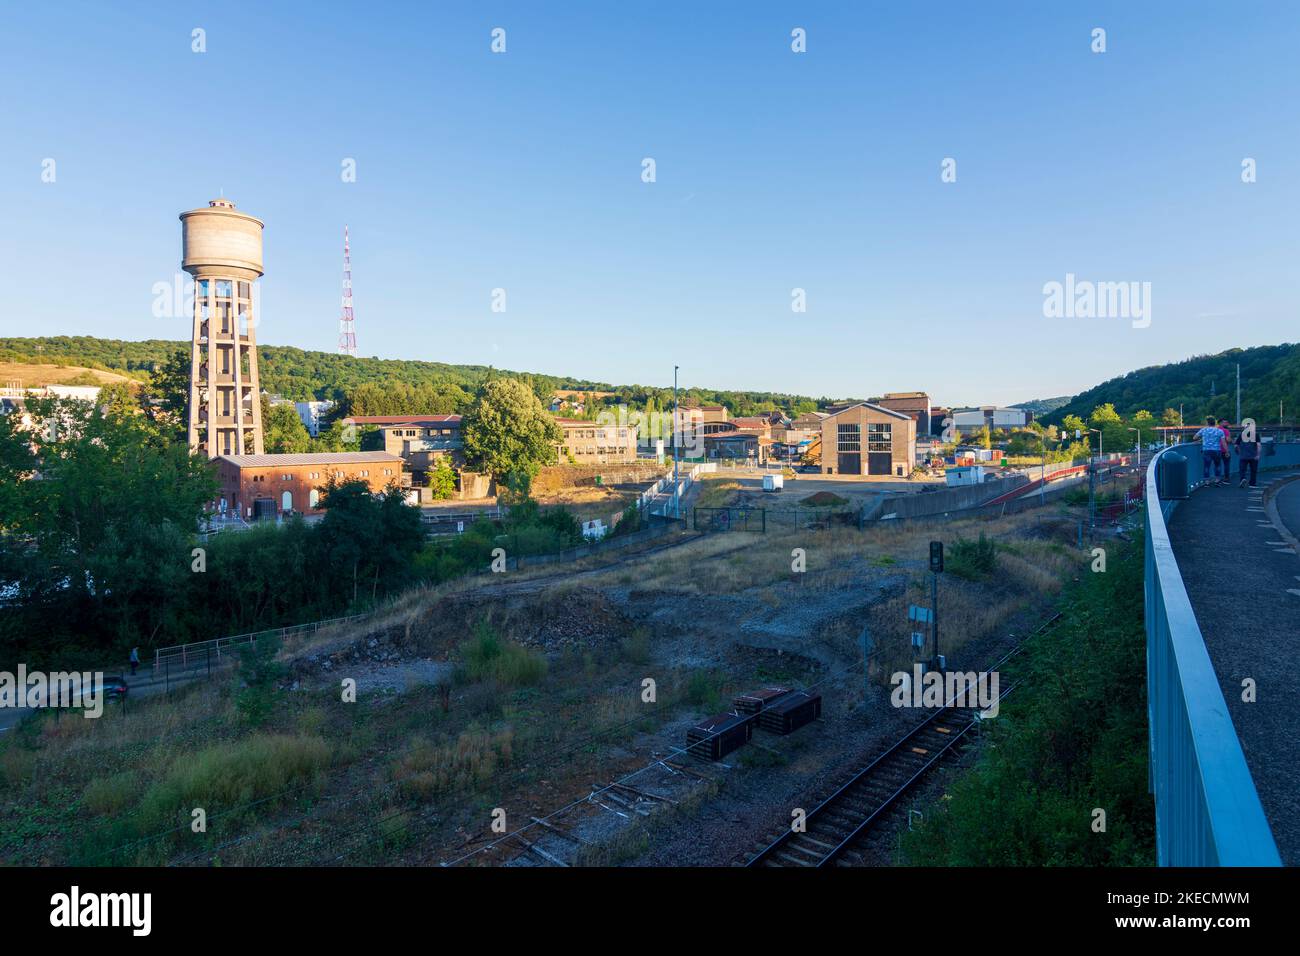 Dudelange (Diddeleng, Düdelingen), water tower in former ARBED steelworks area, RTL broadcasting tower in Luxembourg Stock Photo